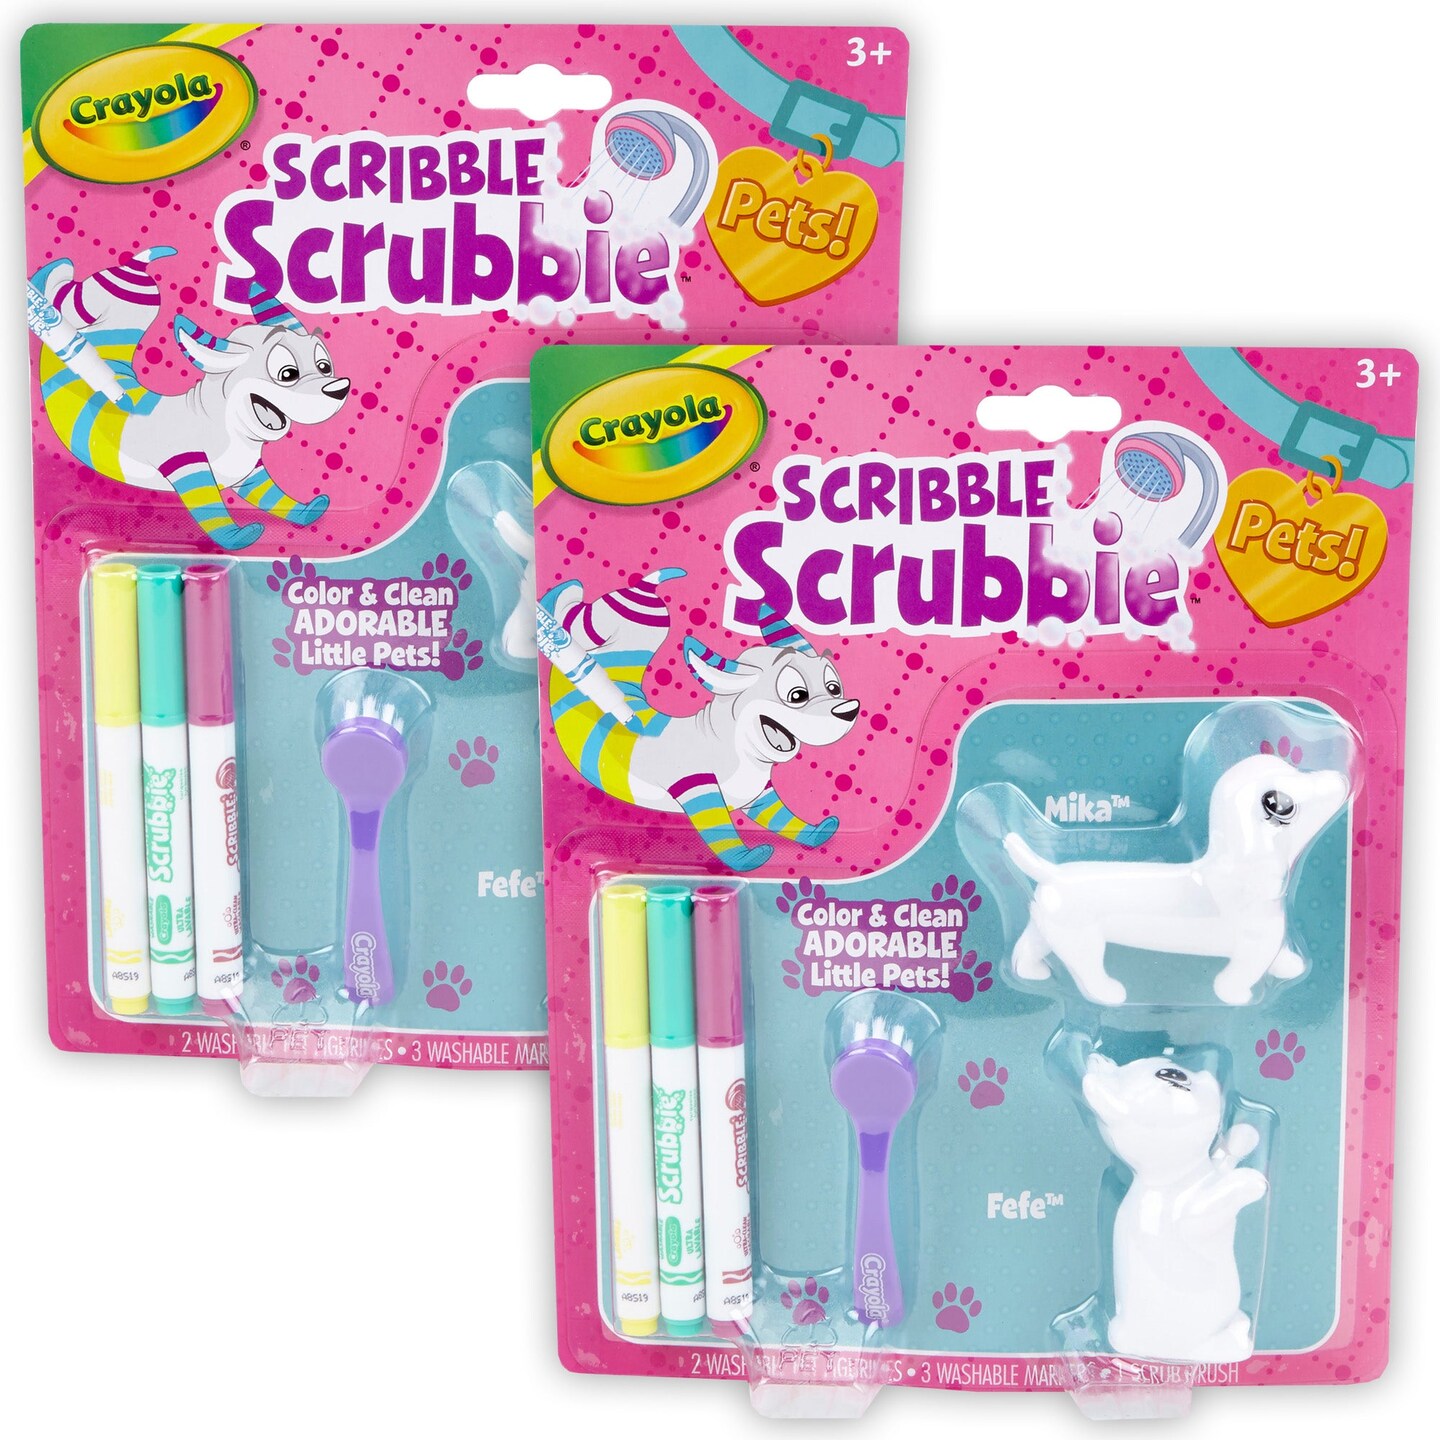 New Crayola Scribble Scrubbie Pets Dog Mika and Cat Fefe Set